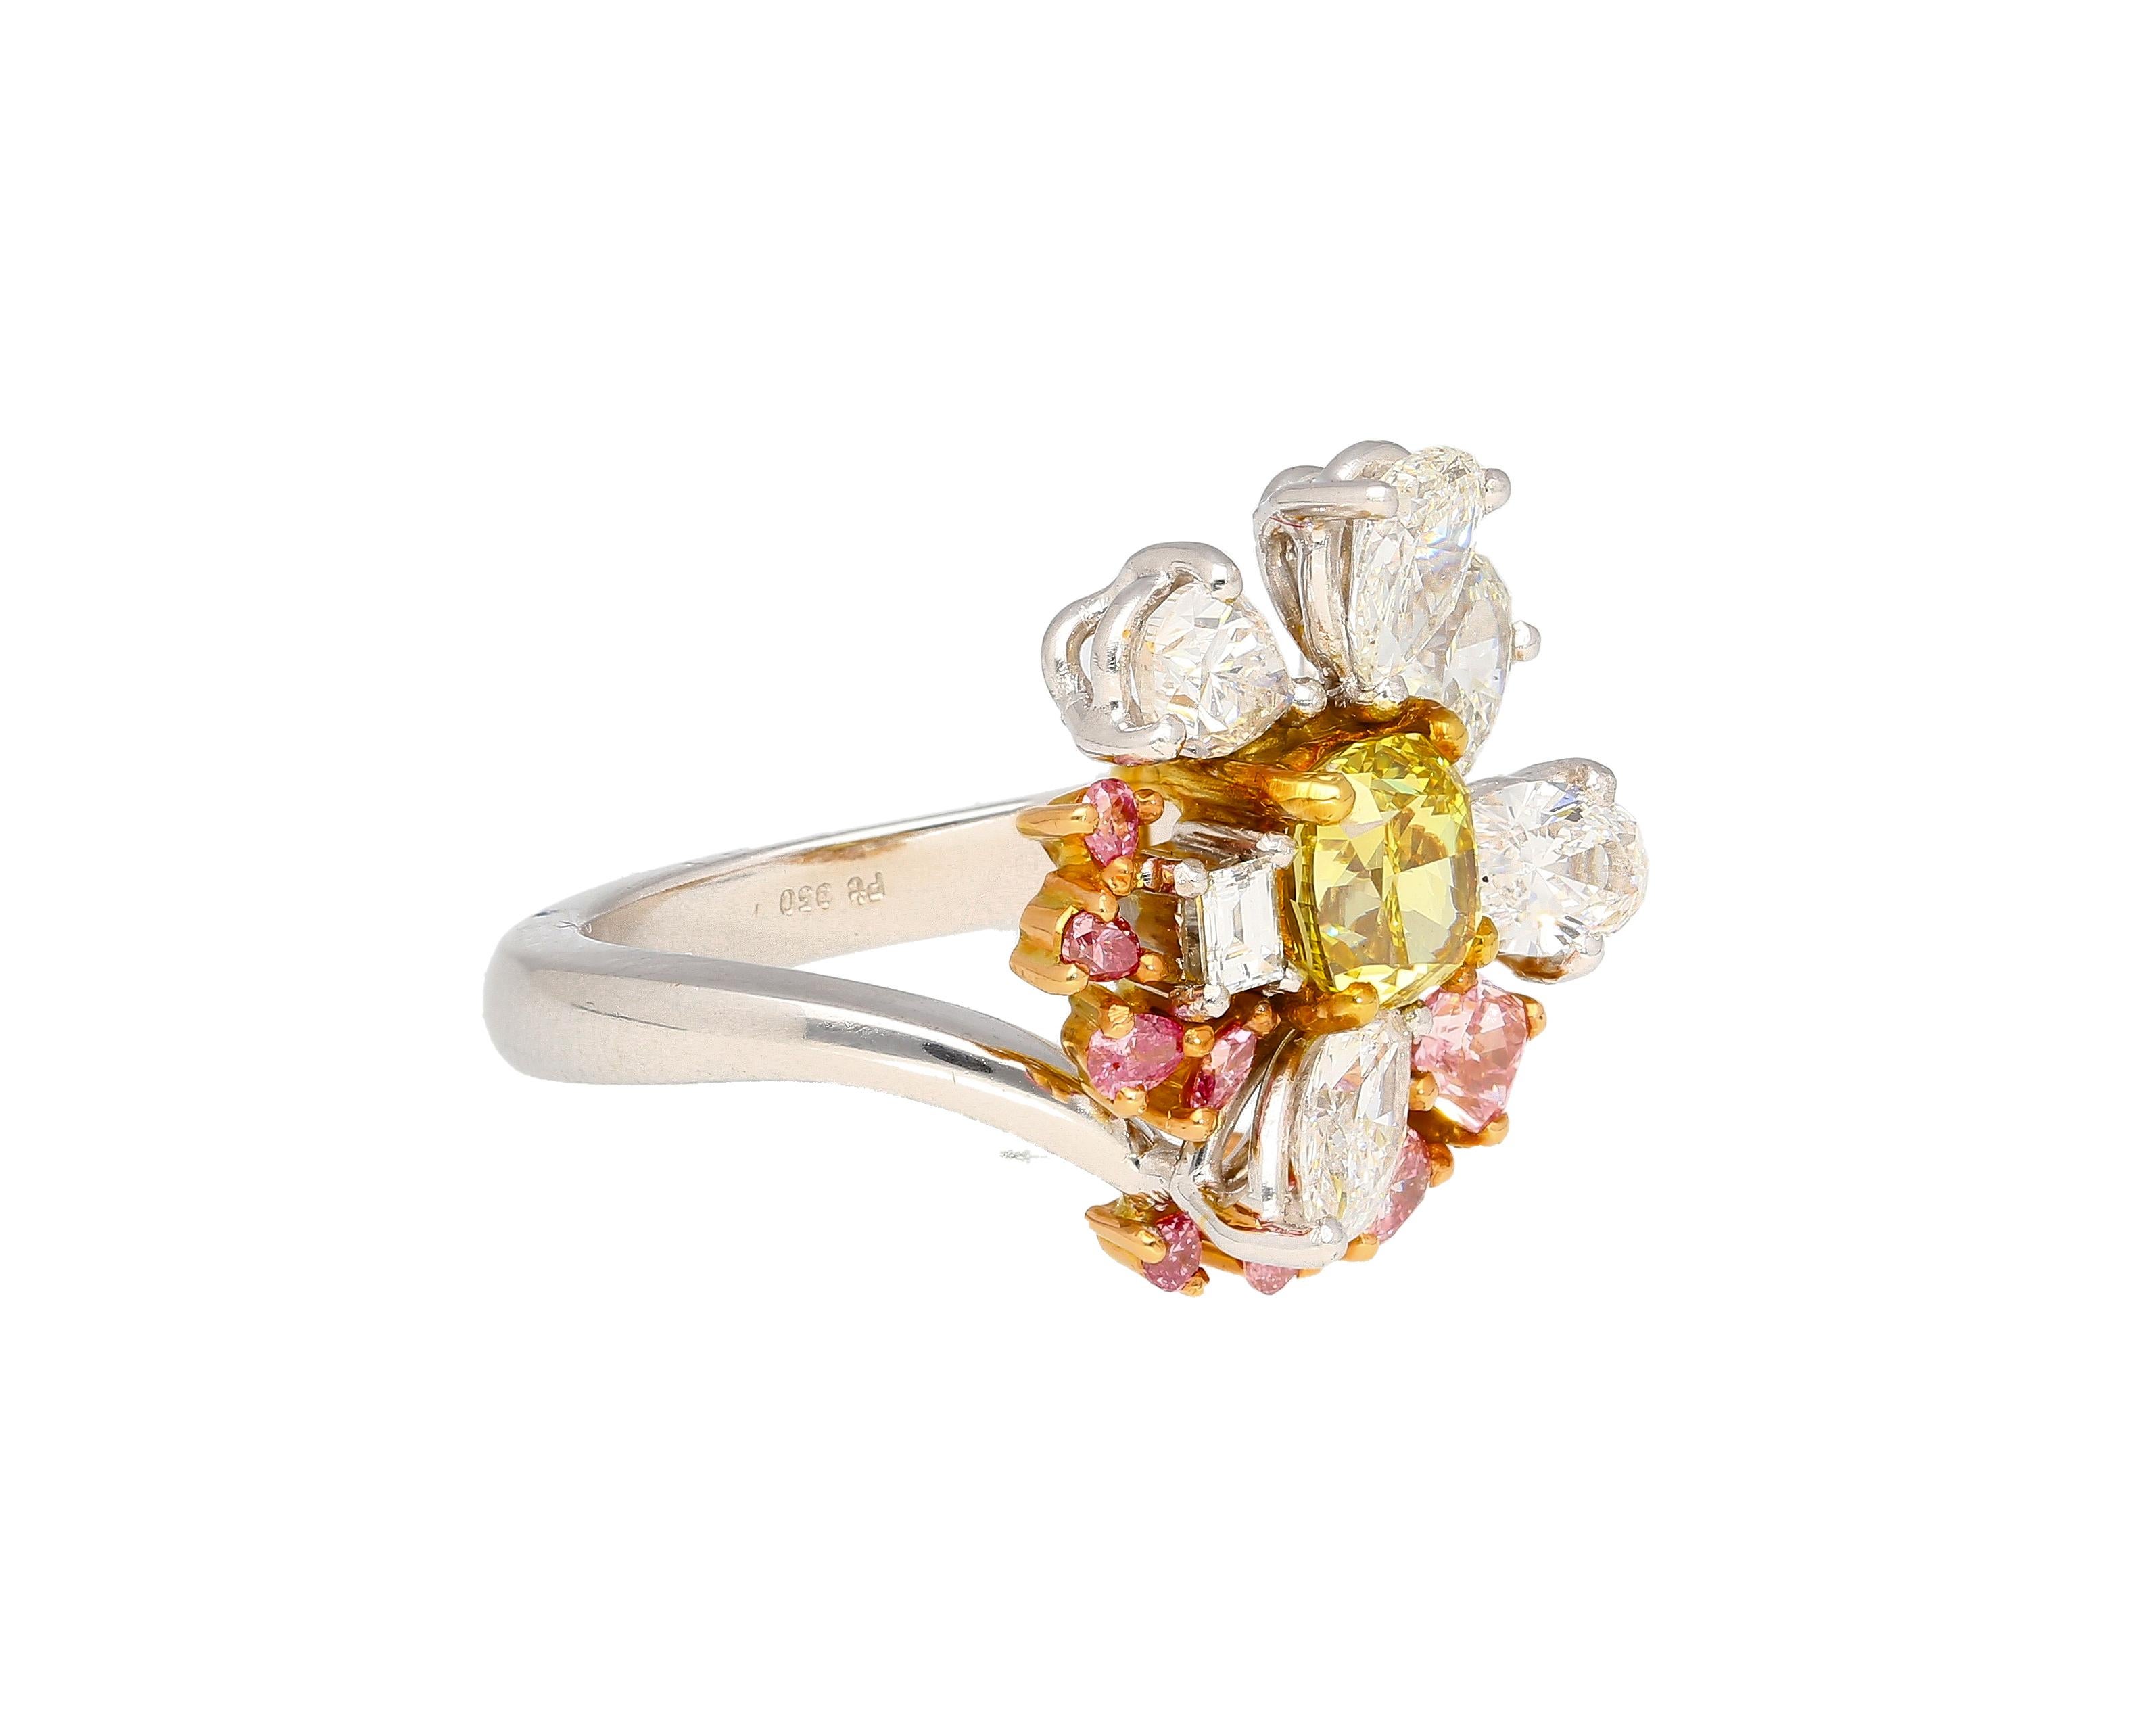 GIA Certified Fancy Yellow, Pink and White Diamond Ring in Platinum 950 & 18K In New Condition For Sale In Miami, FL